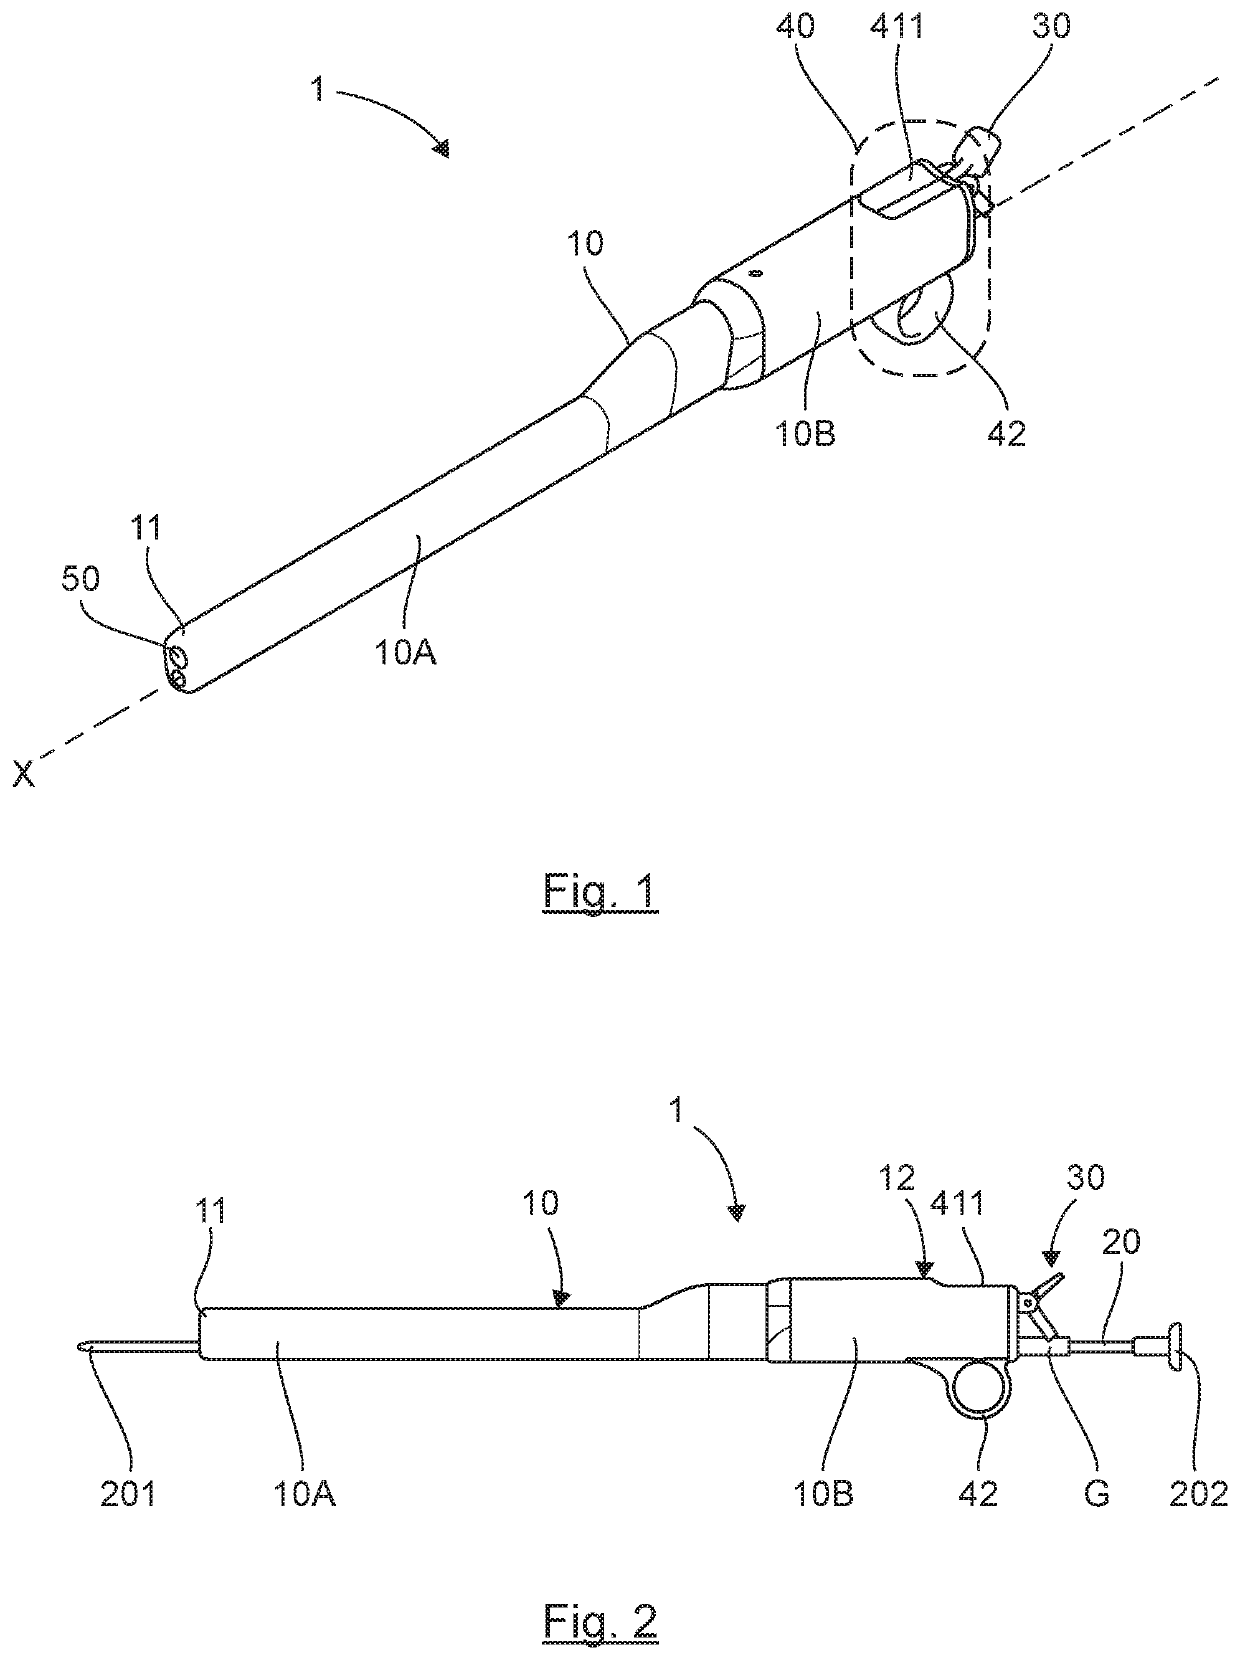 Device for artificial insemination, gynaecological examination of the vagina and the cervix, and to assist with uterine treatments and sample collection in livestock